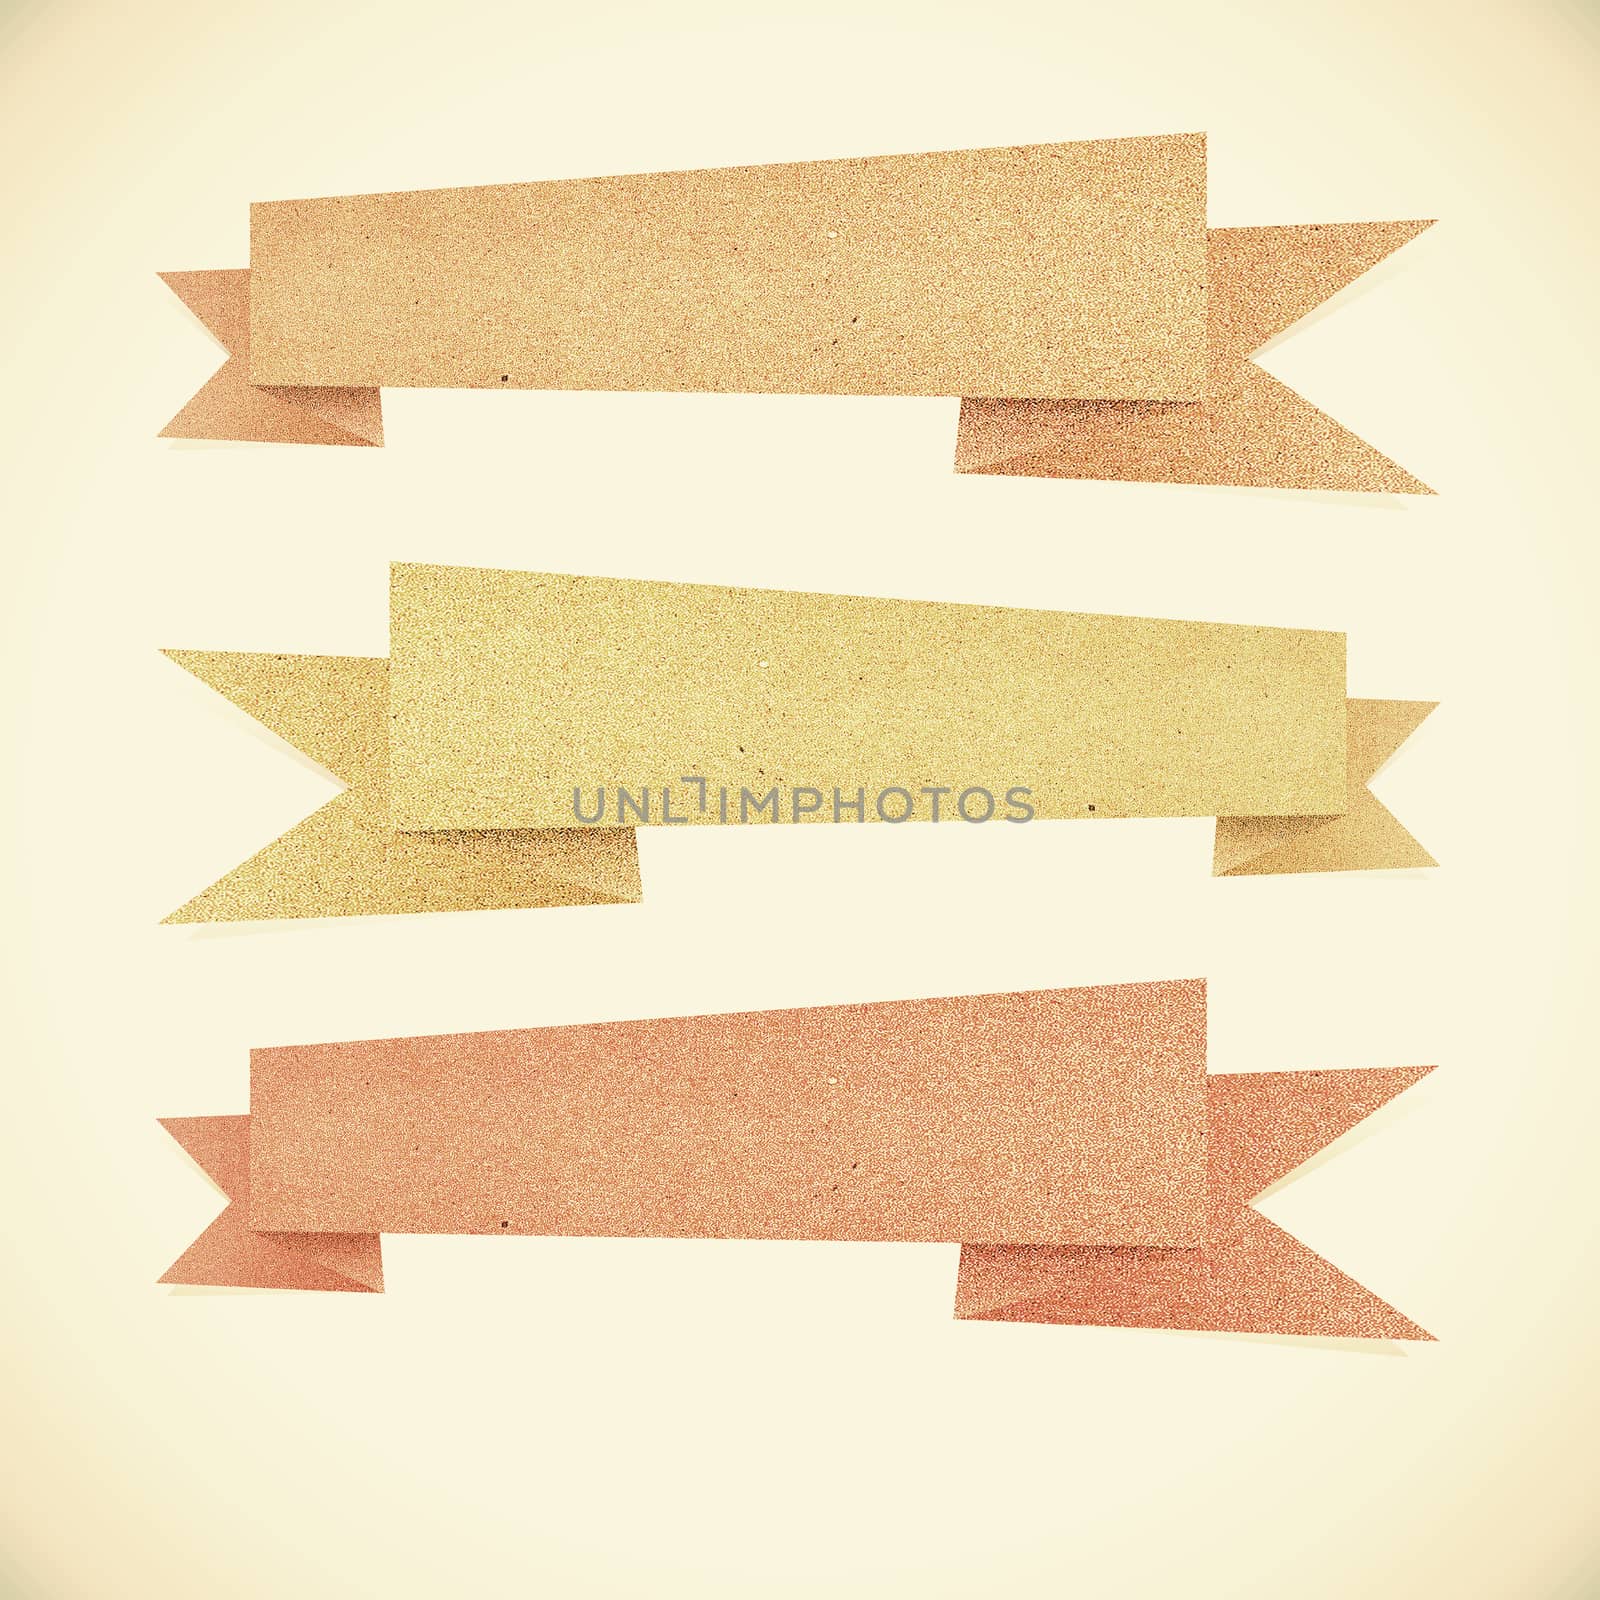 Paper texture ,Header tag recycled paper on vintage tone style